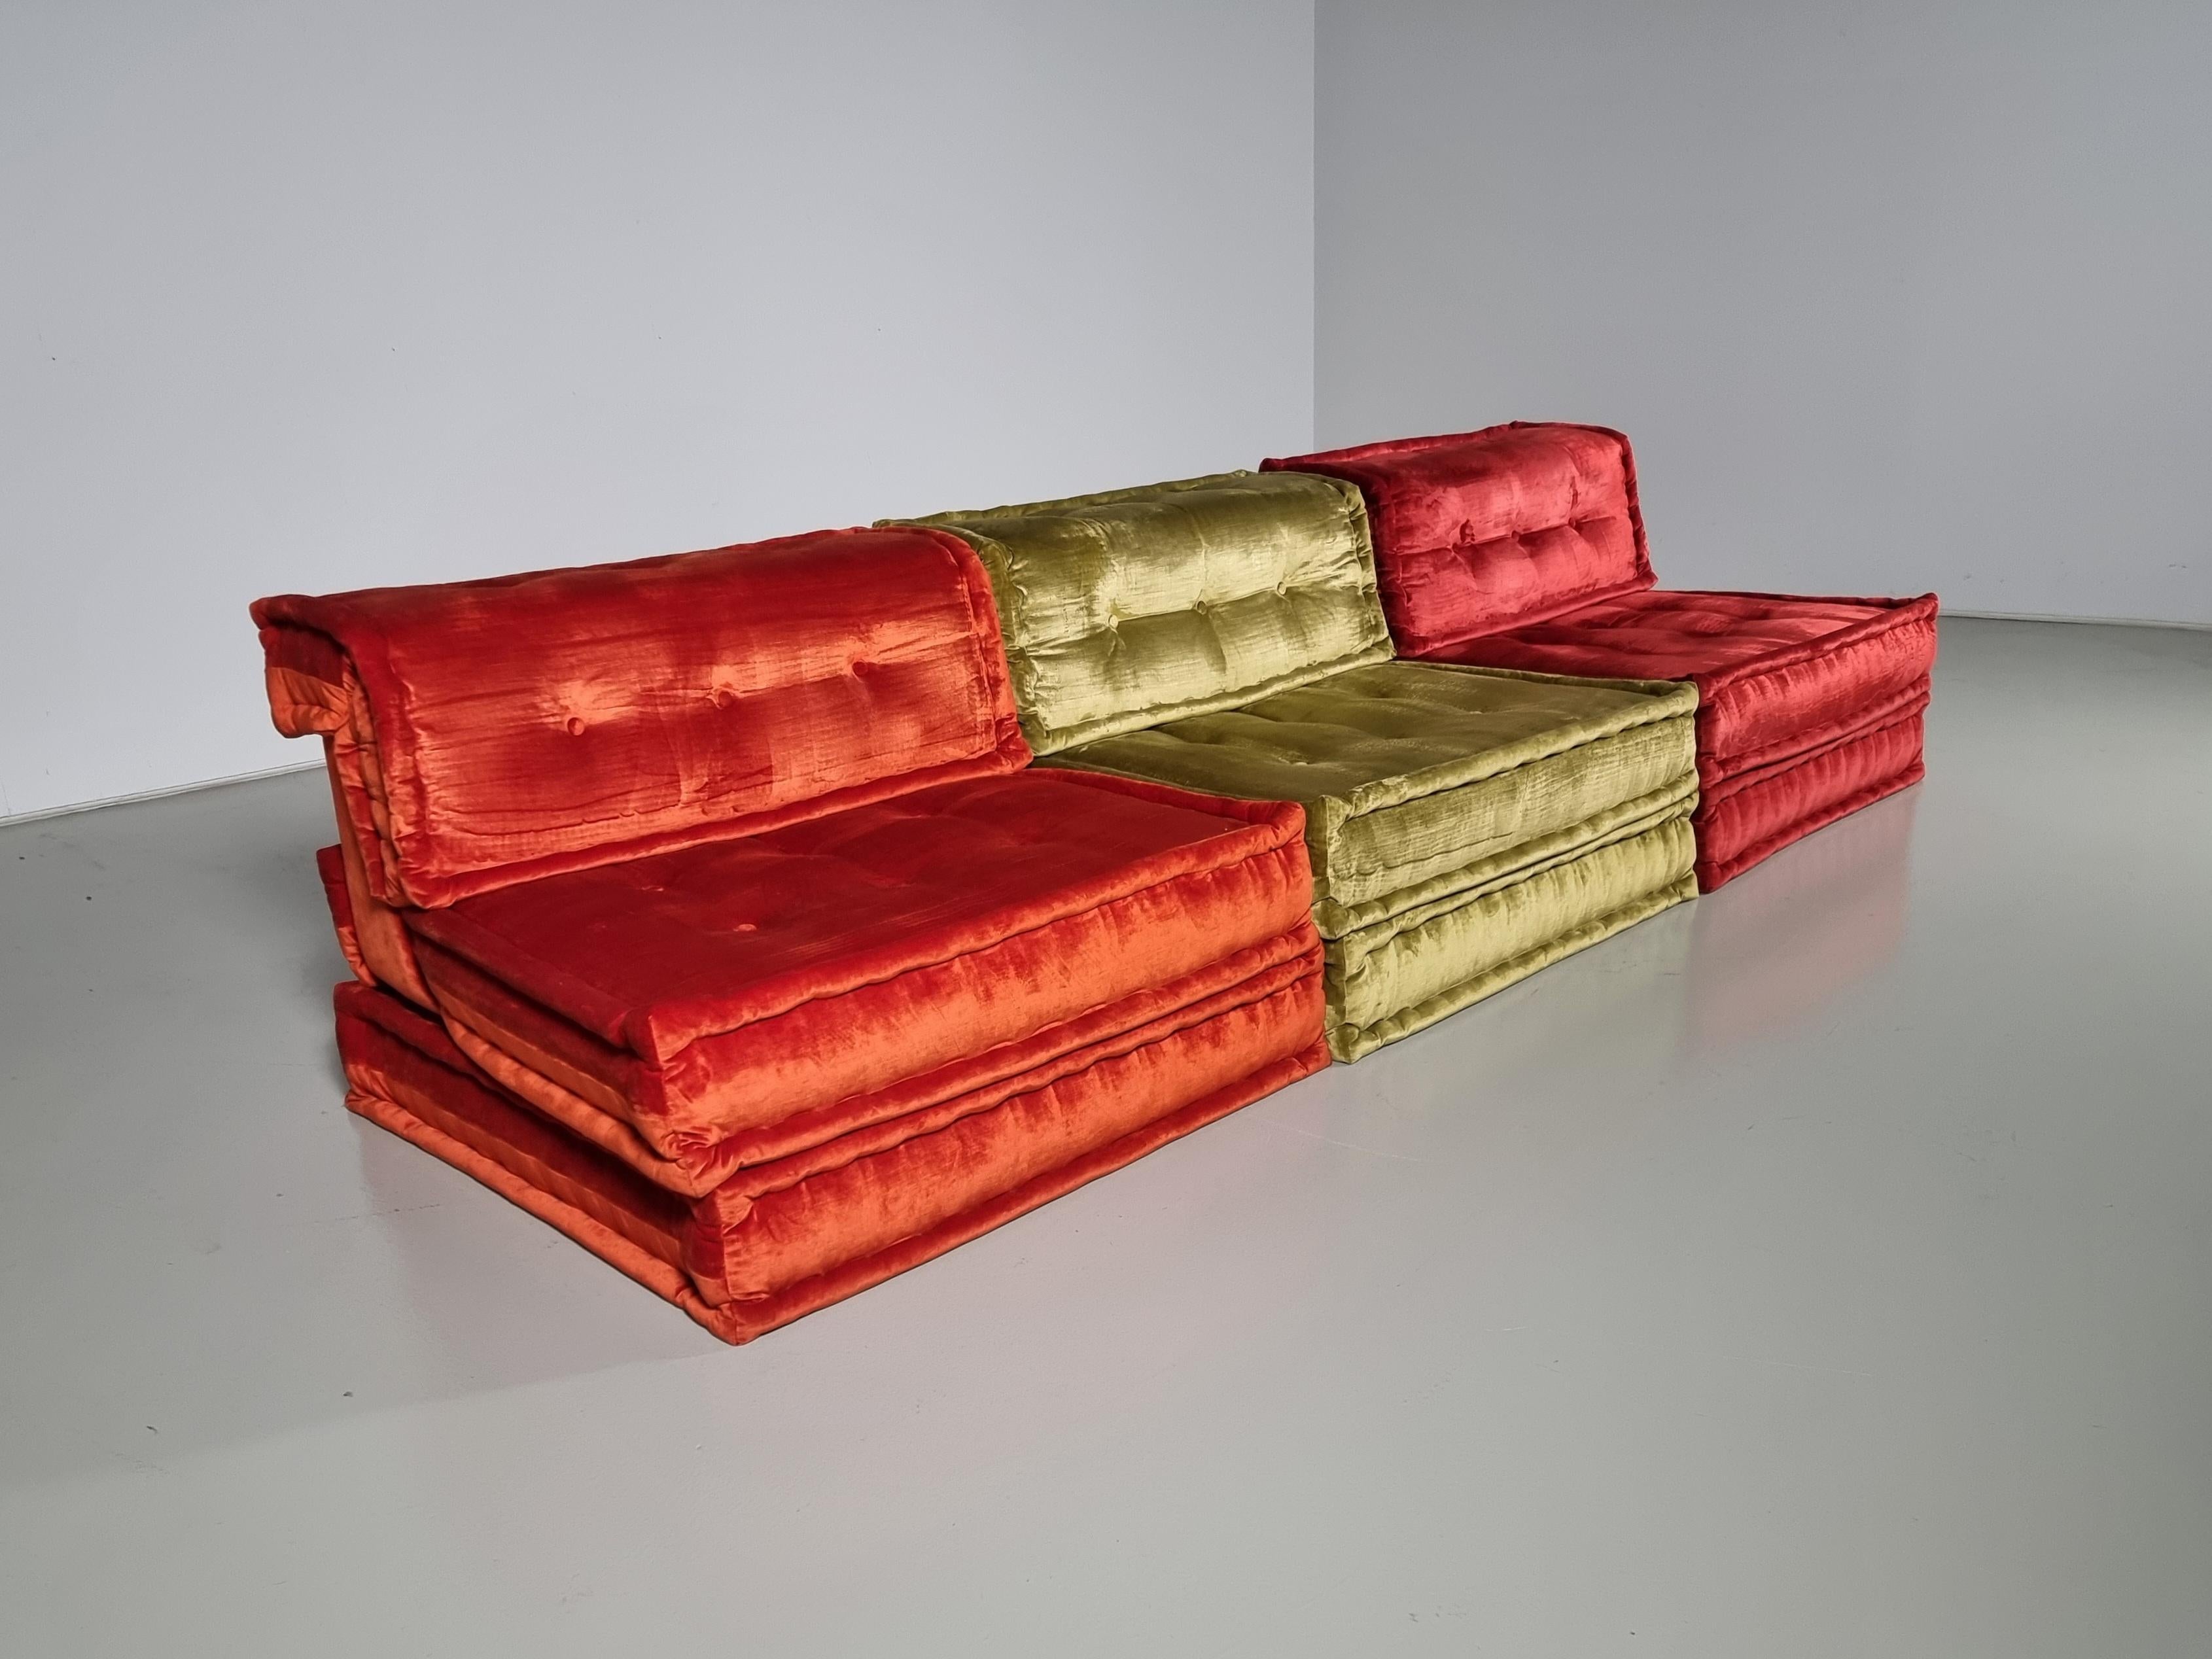 Mah Jong modular sofa set by Hans Hopfer, designed in 1971 for Roche Bobois and in a current customized mix of textiles by the house of Missoni. Features multiple cushions that can be arranged in an endless number of ways, This set includes 6